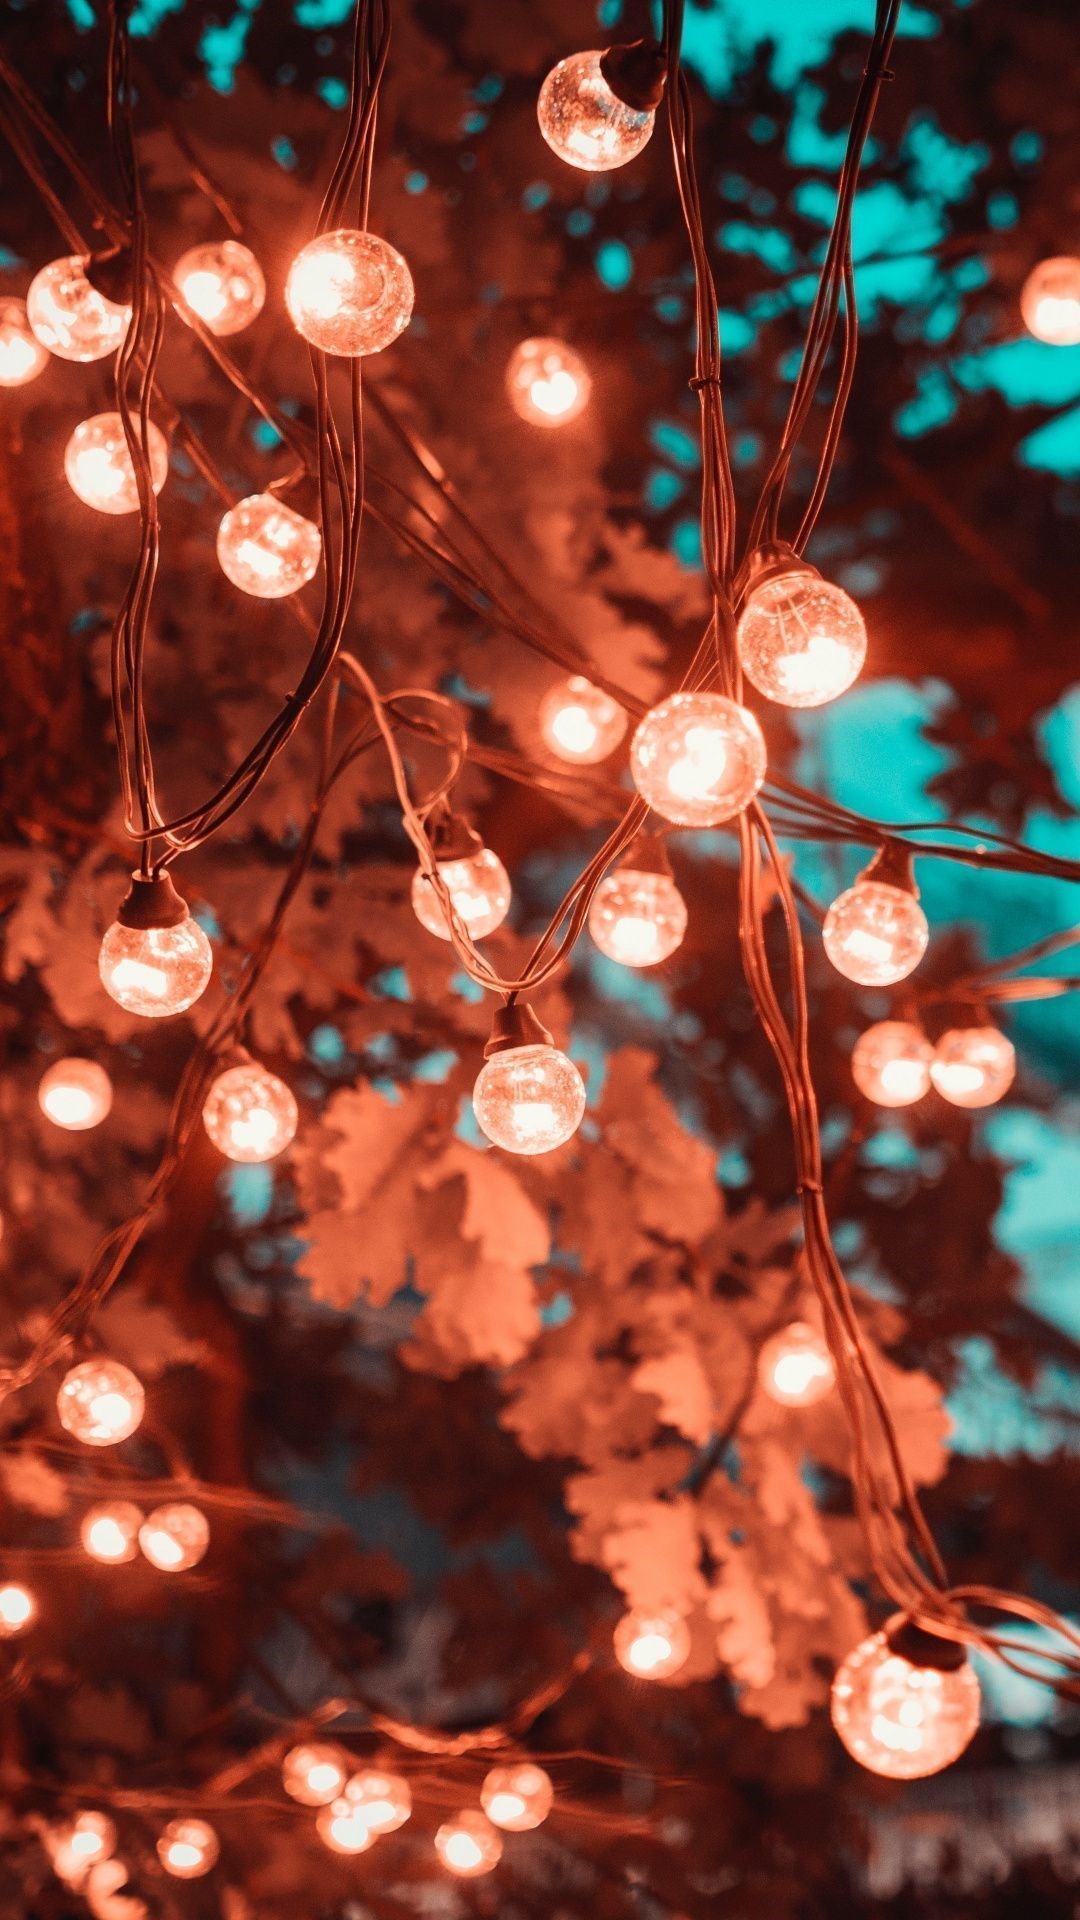 A close up of some lights hanging from trees - Profile picture, Christmas lights